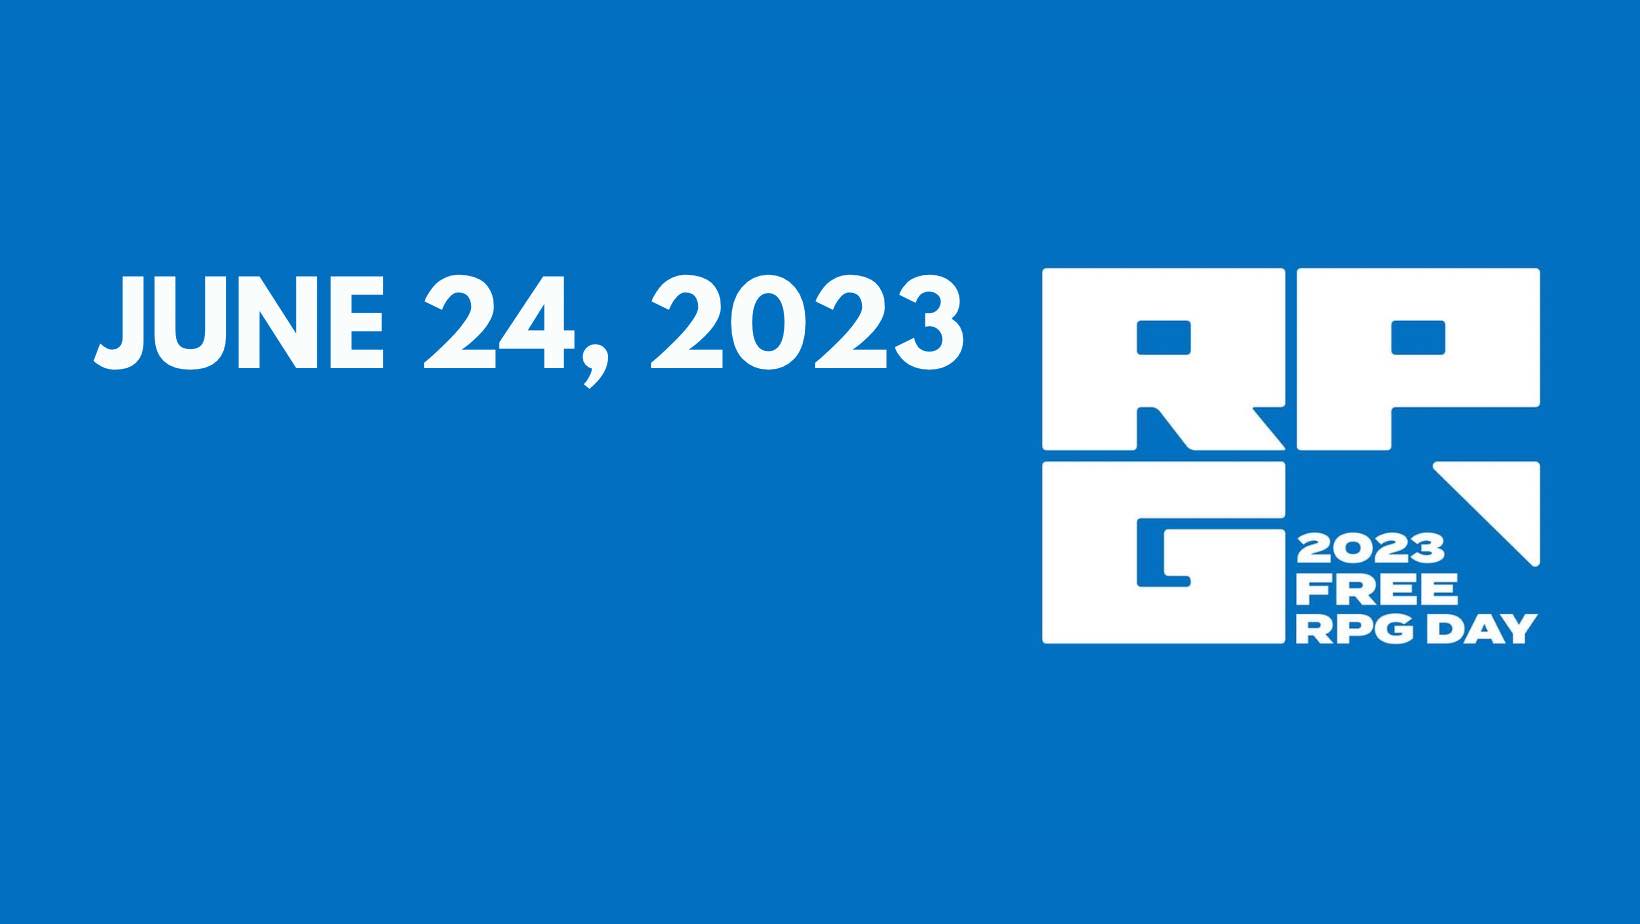 Free RPG Day Logo and Date.jpg